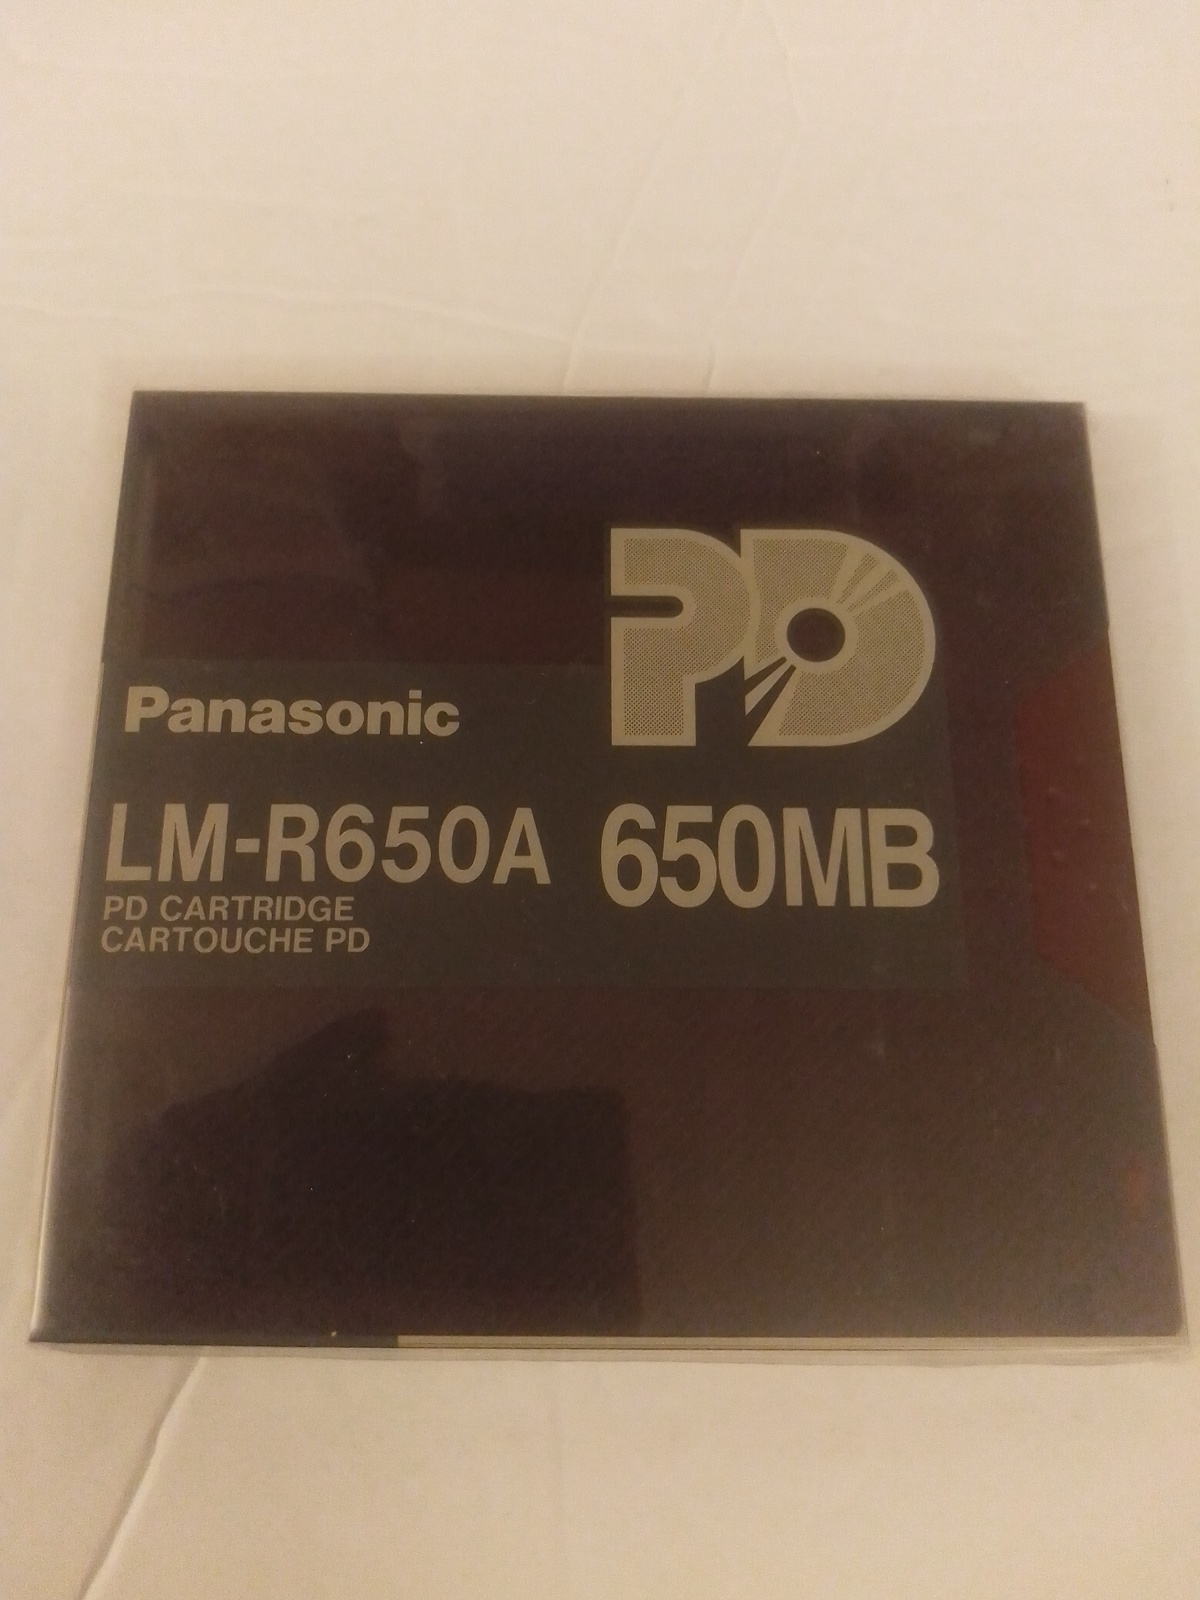 Panasonic PD Optical Media LM-R650A For PD/CD-ROM Drives Single Pack Brand New - $14.99